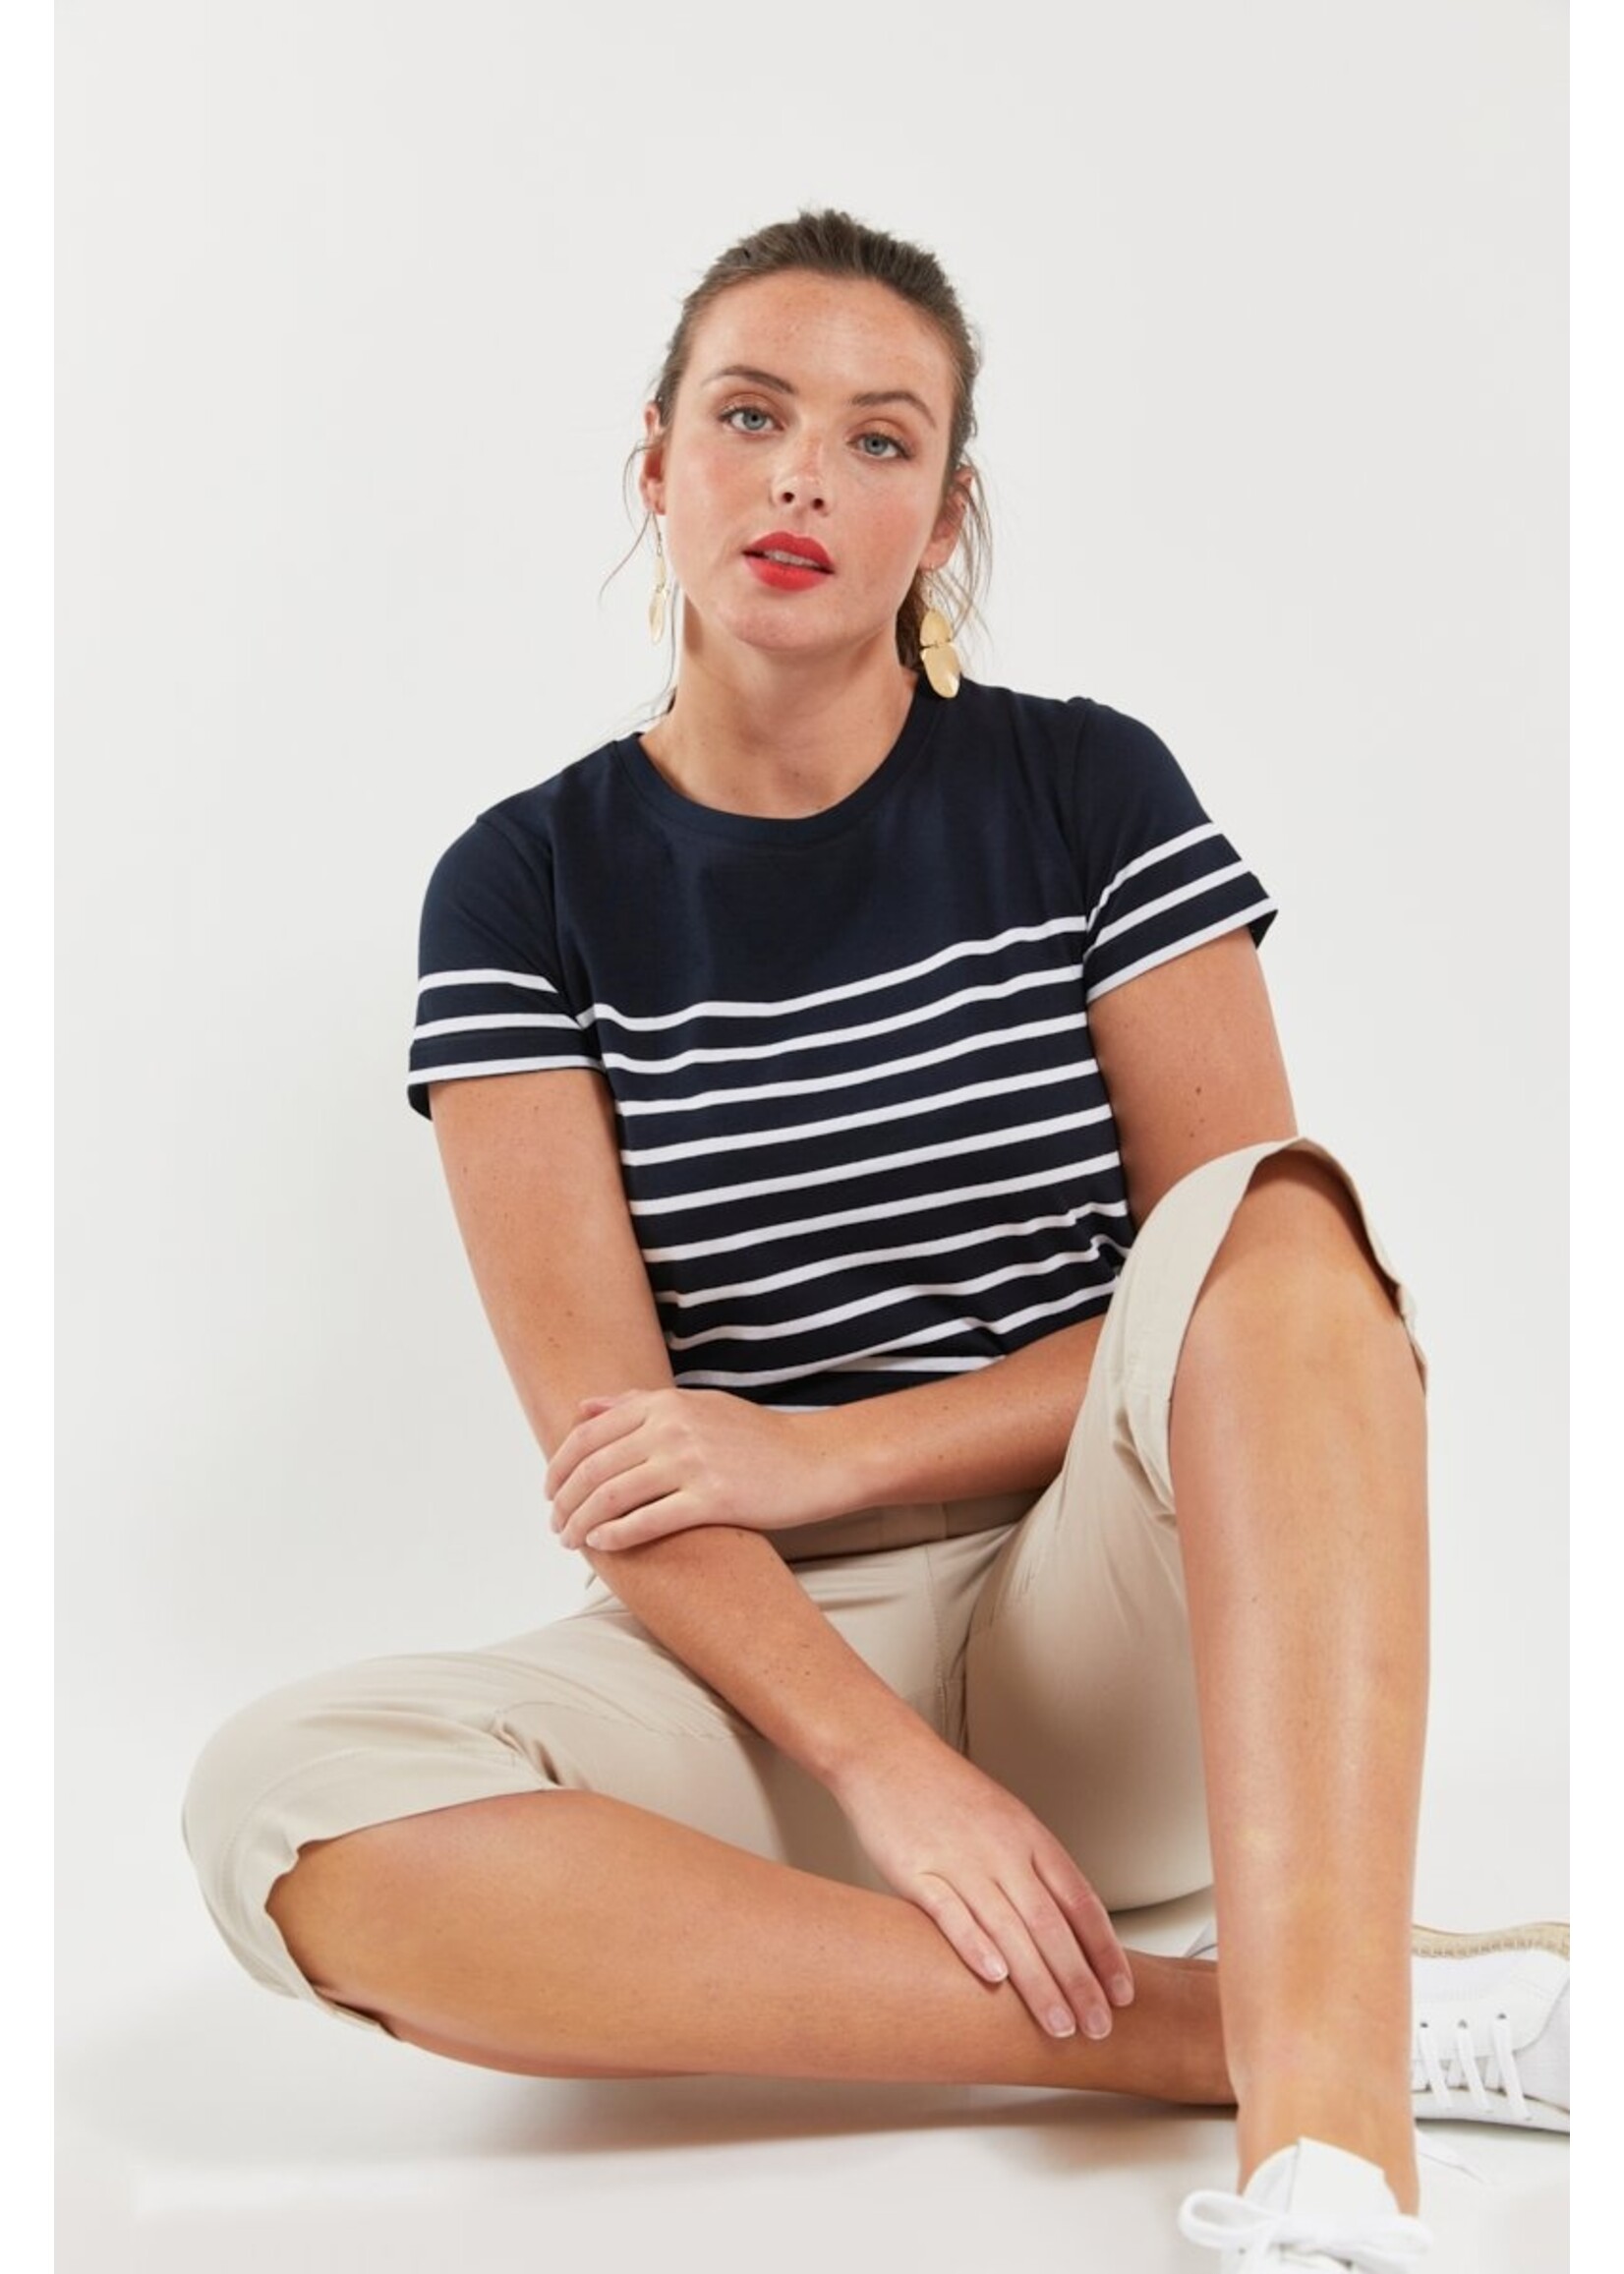 ARMOR-LUX Women's Heritage collection sailor shirt